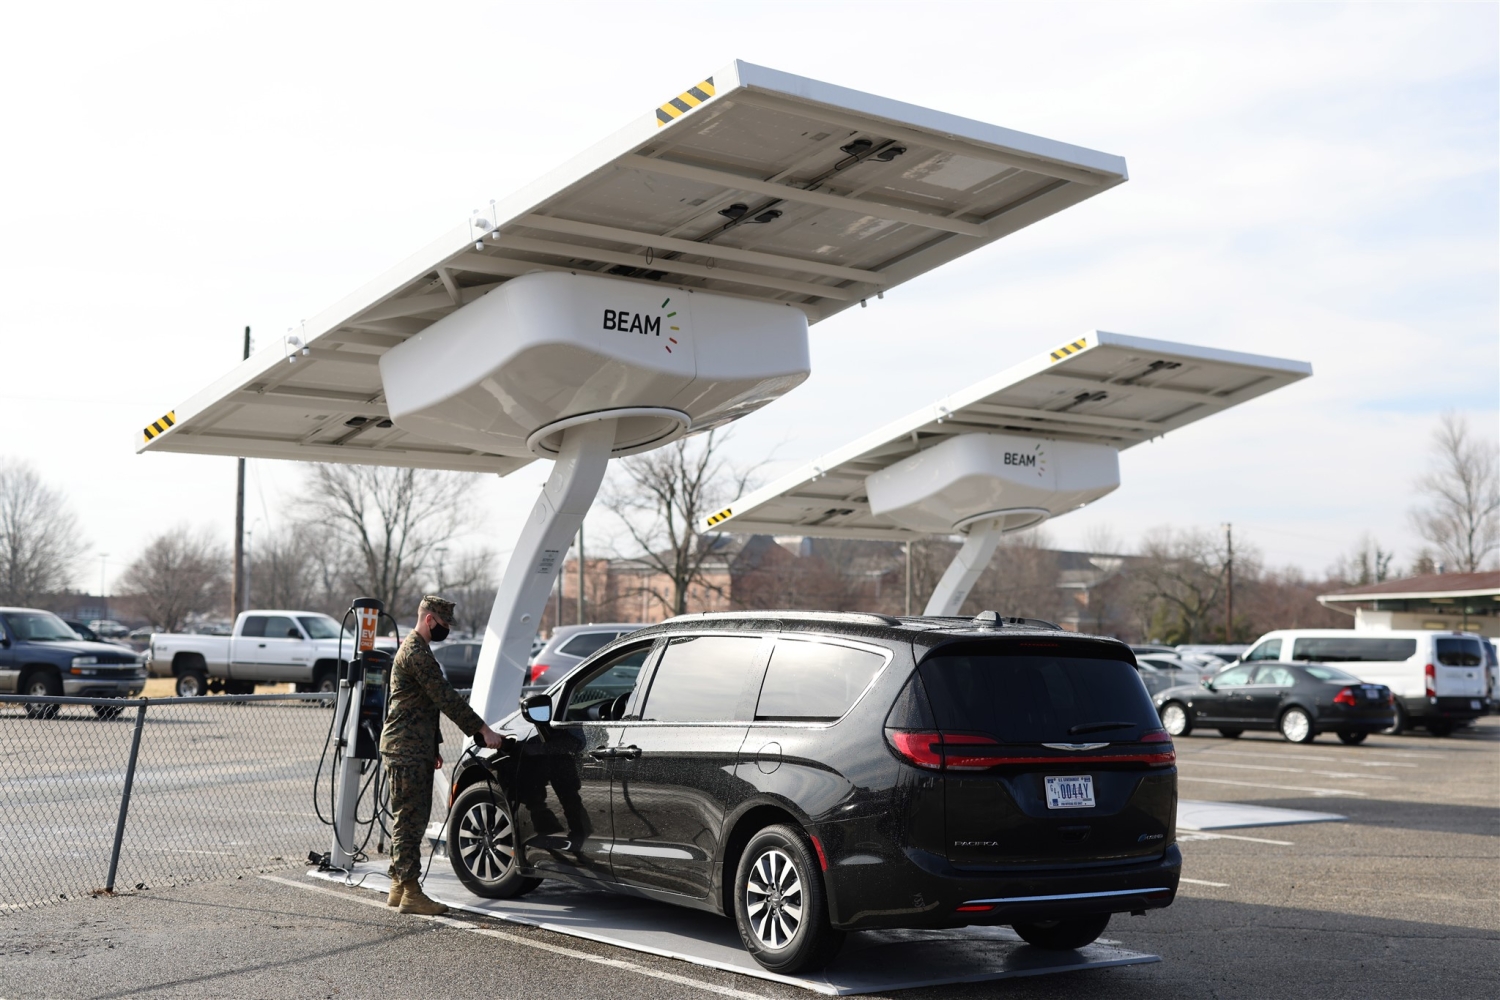 Moving ahead with EVs, the DOD testing best methods to rollout EV chargers